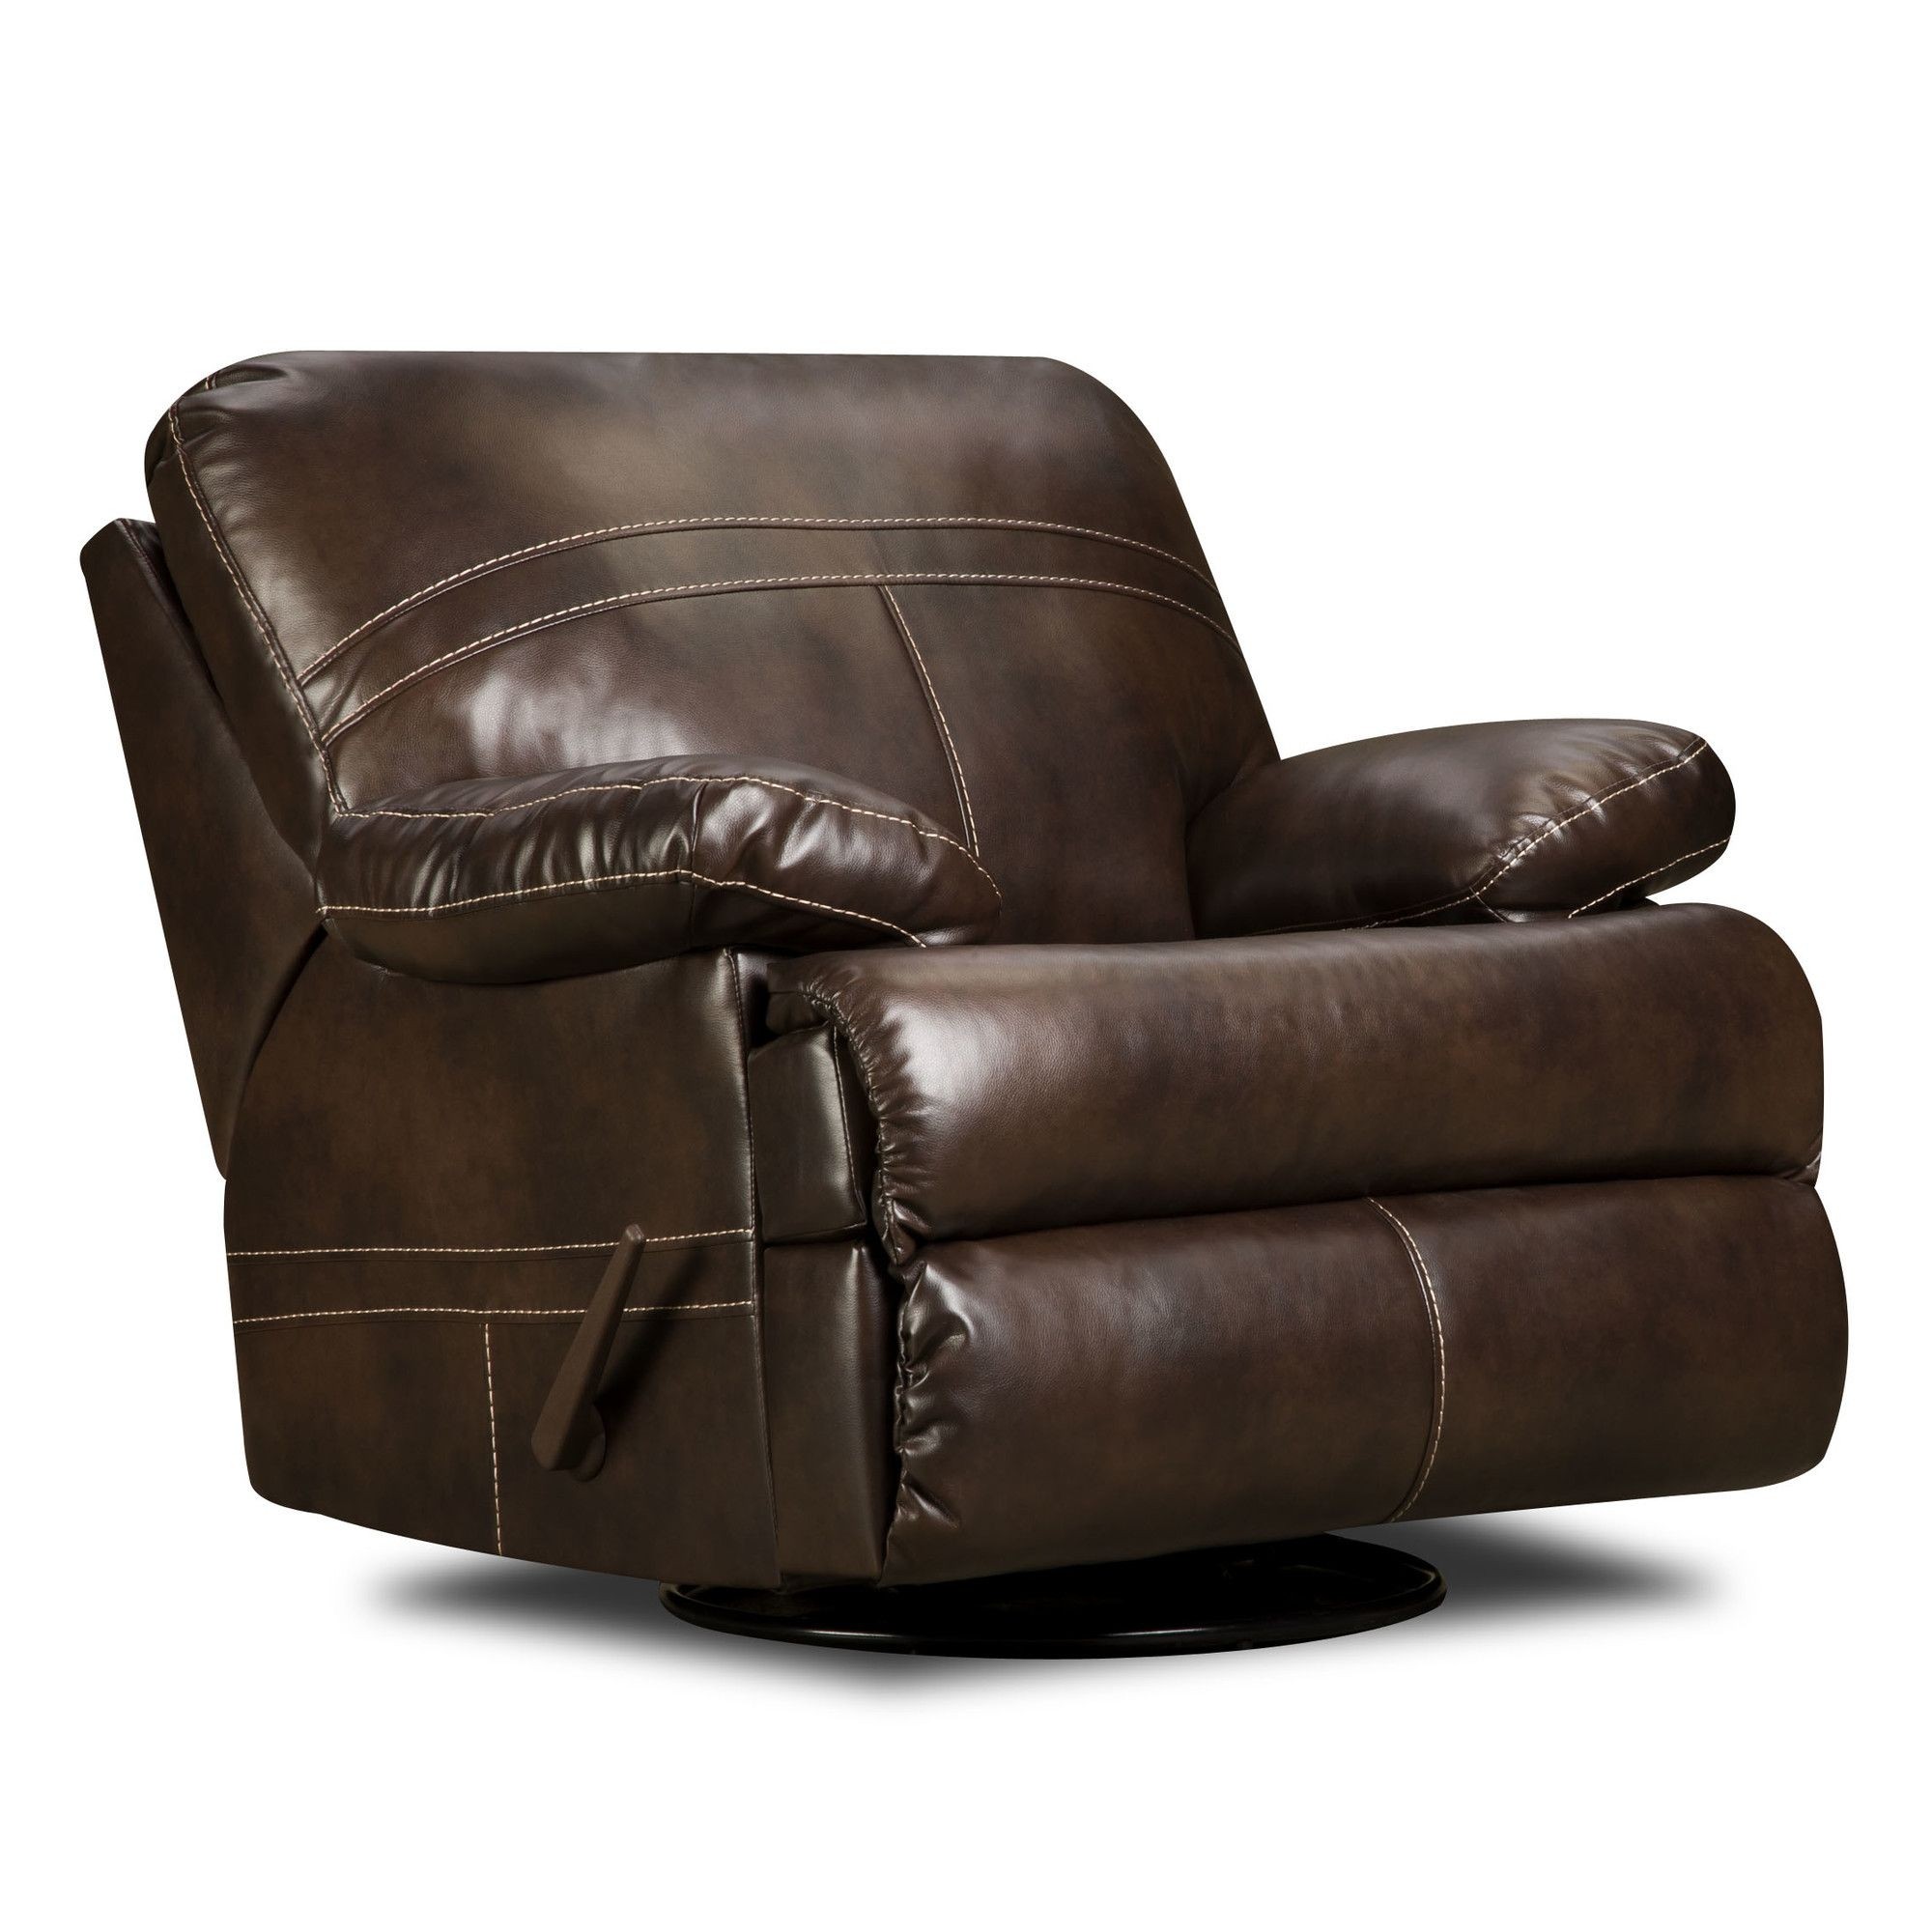 Miracle Swivel Glider Recliner